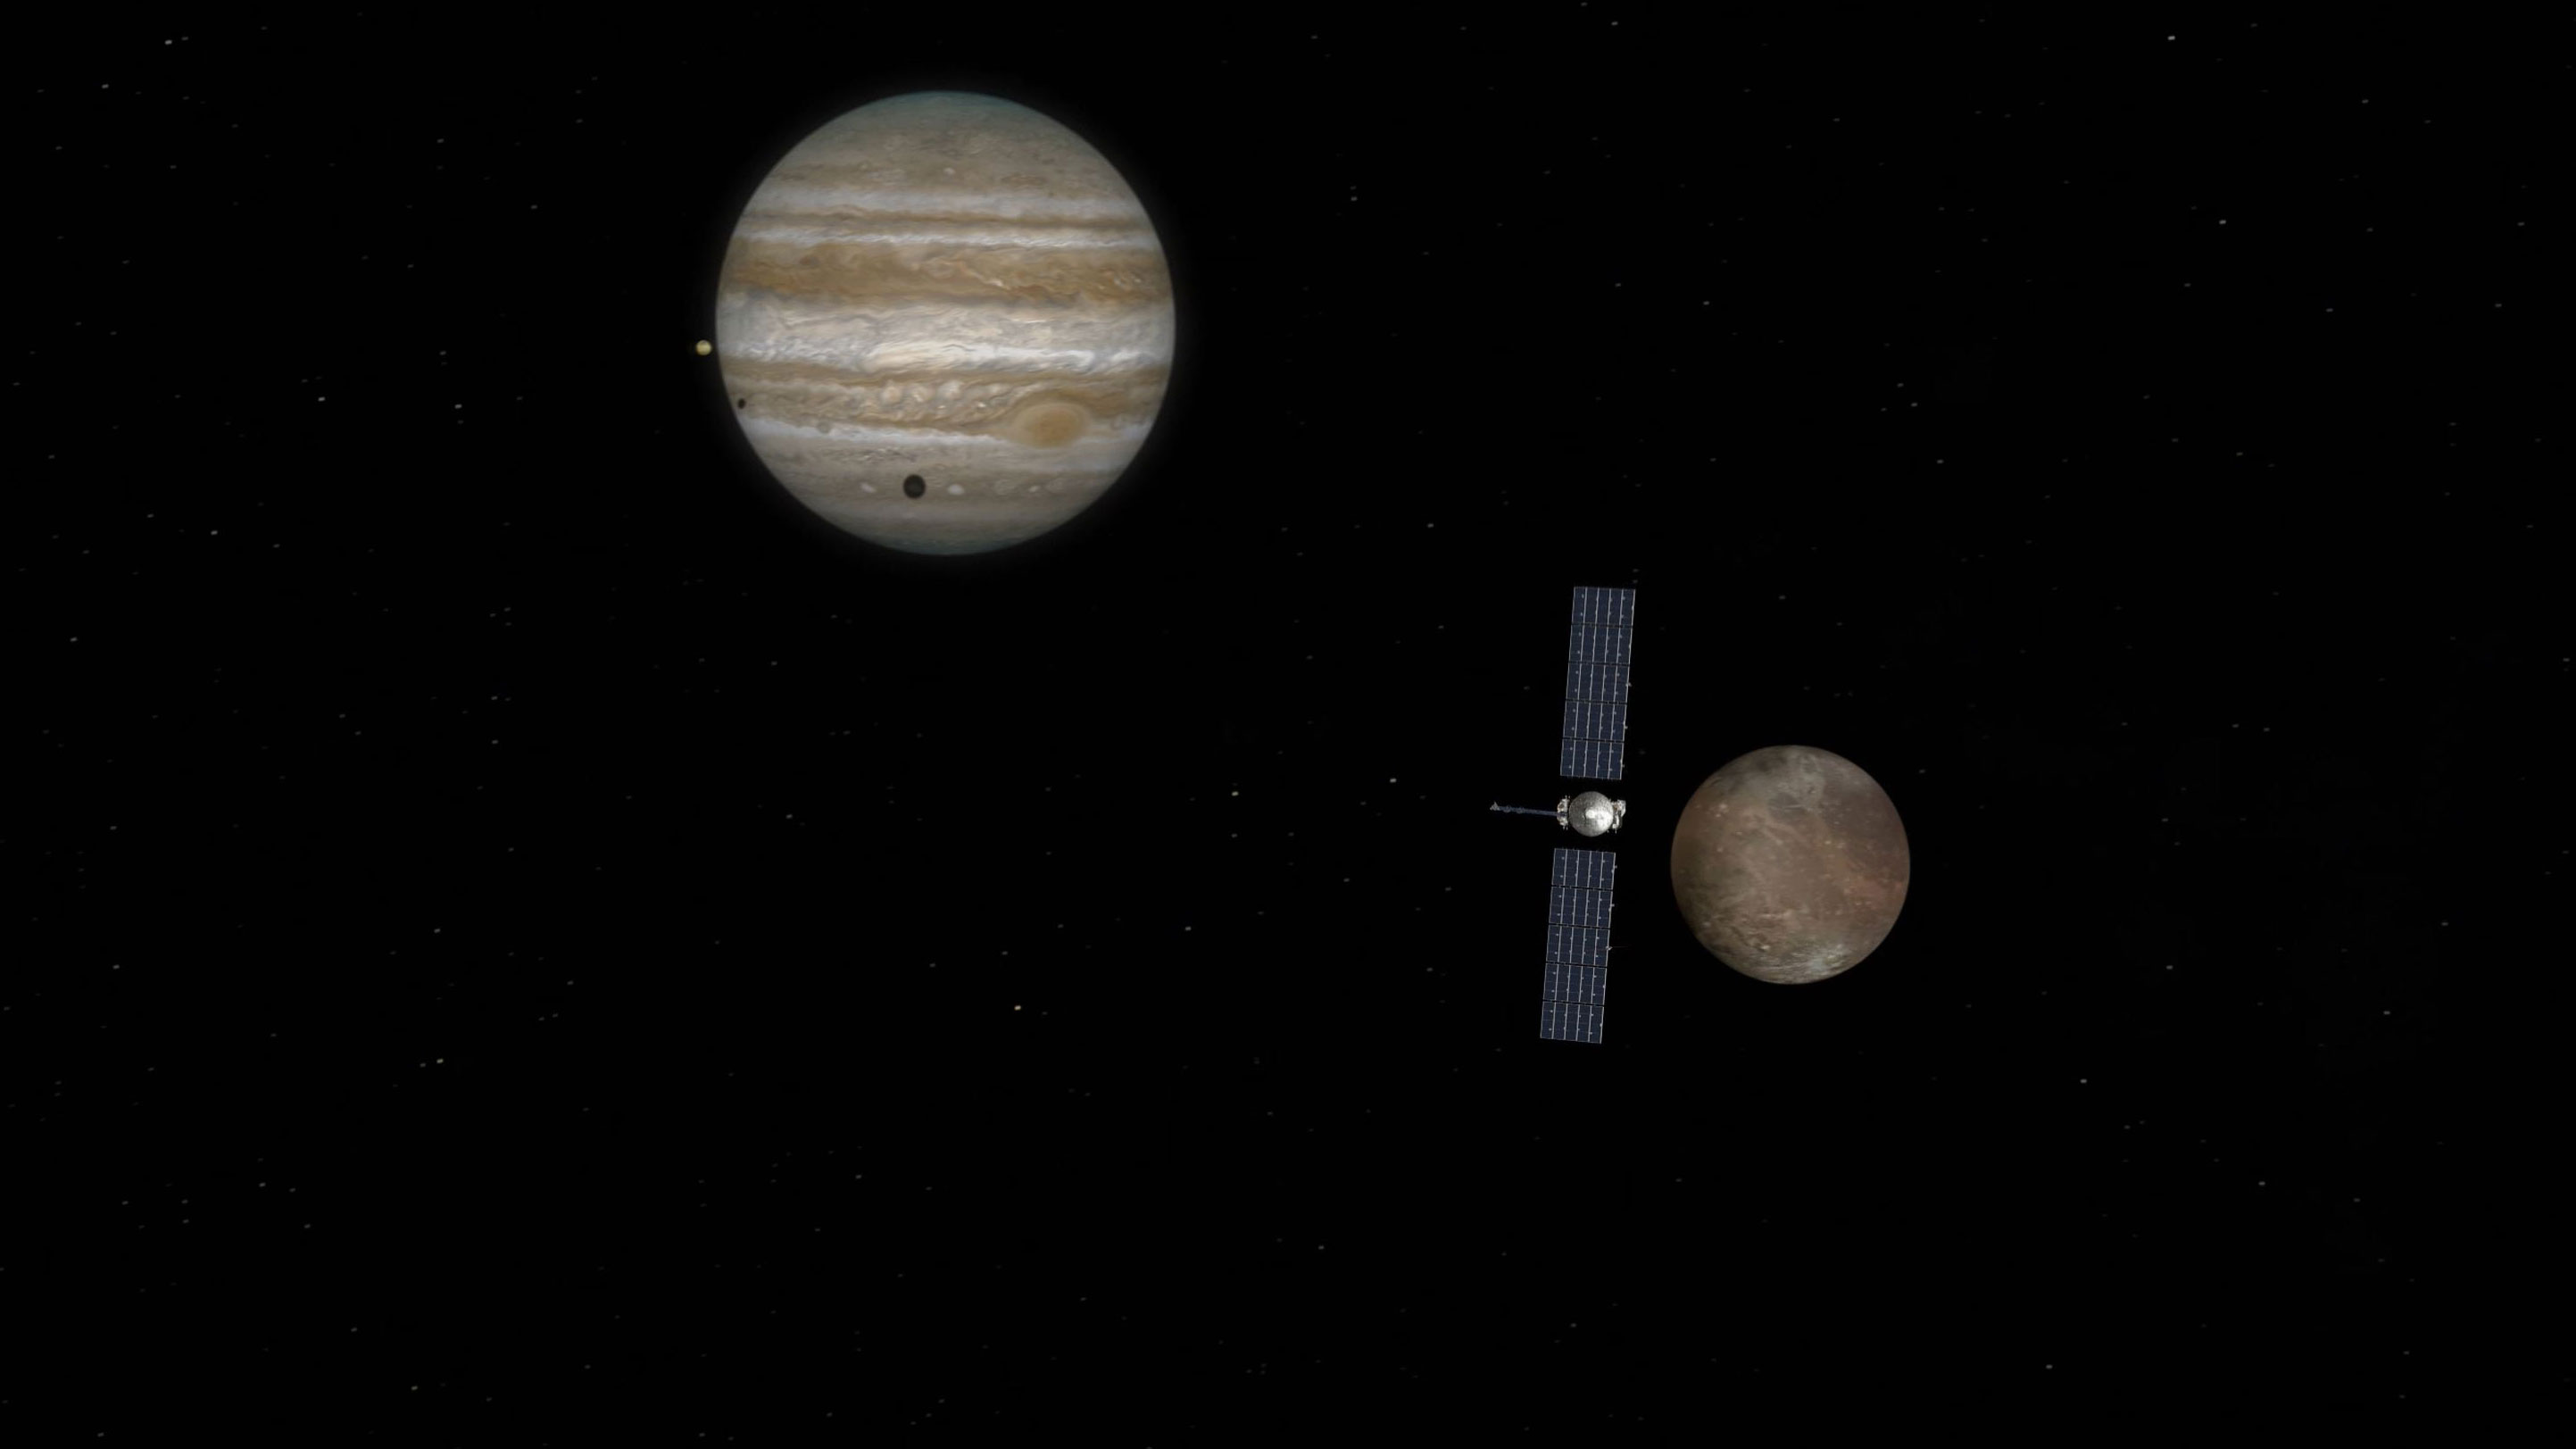 An illustration from an animation showing Europa Clipper with Jupiter and Europa.